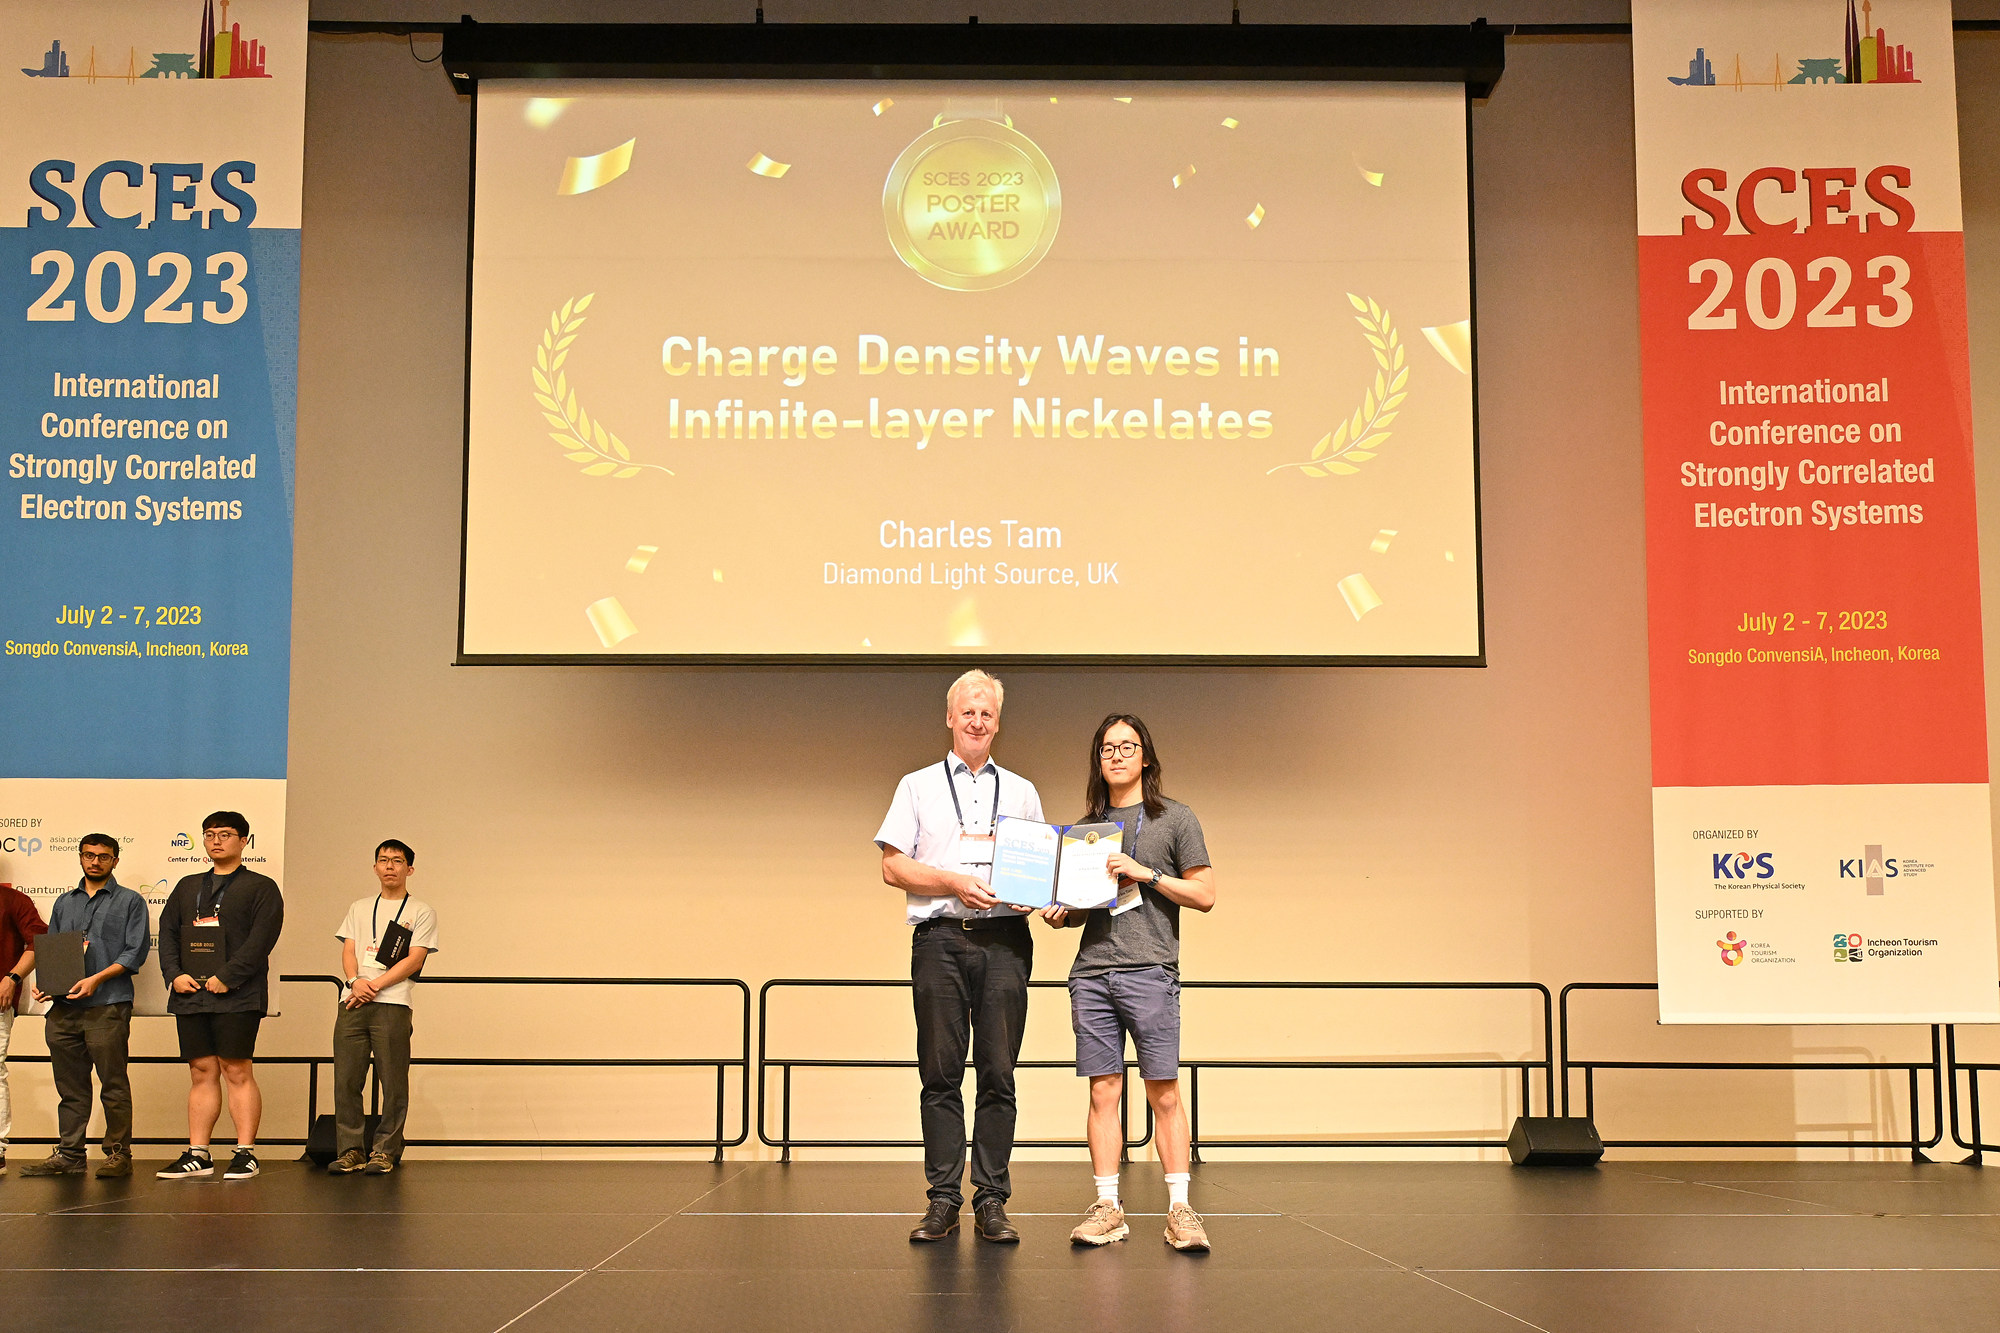 Charles Tam accepts his SCES 2023 poster prize. He is stood on stage next to another person; both are holding the certificate. The projection behind them reads 'Charge Density Waves in Infinite-layer Nickelates.' This is flanked by large SCES 2023 banners on both sides.